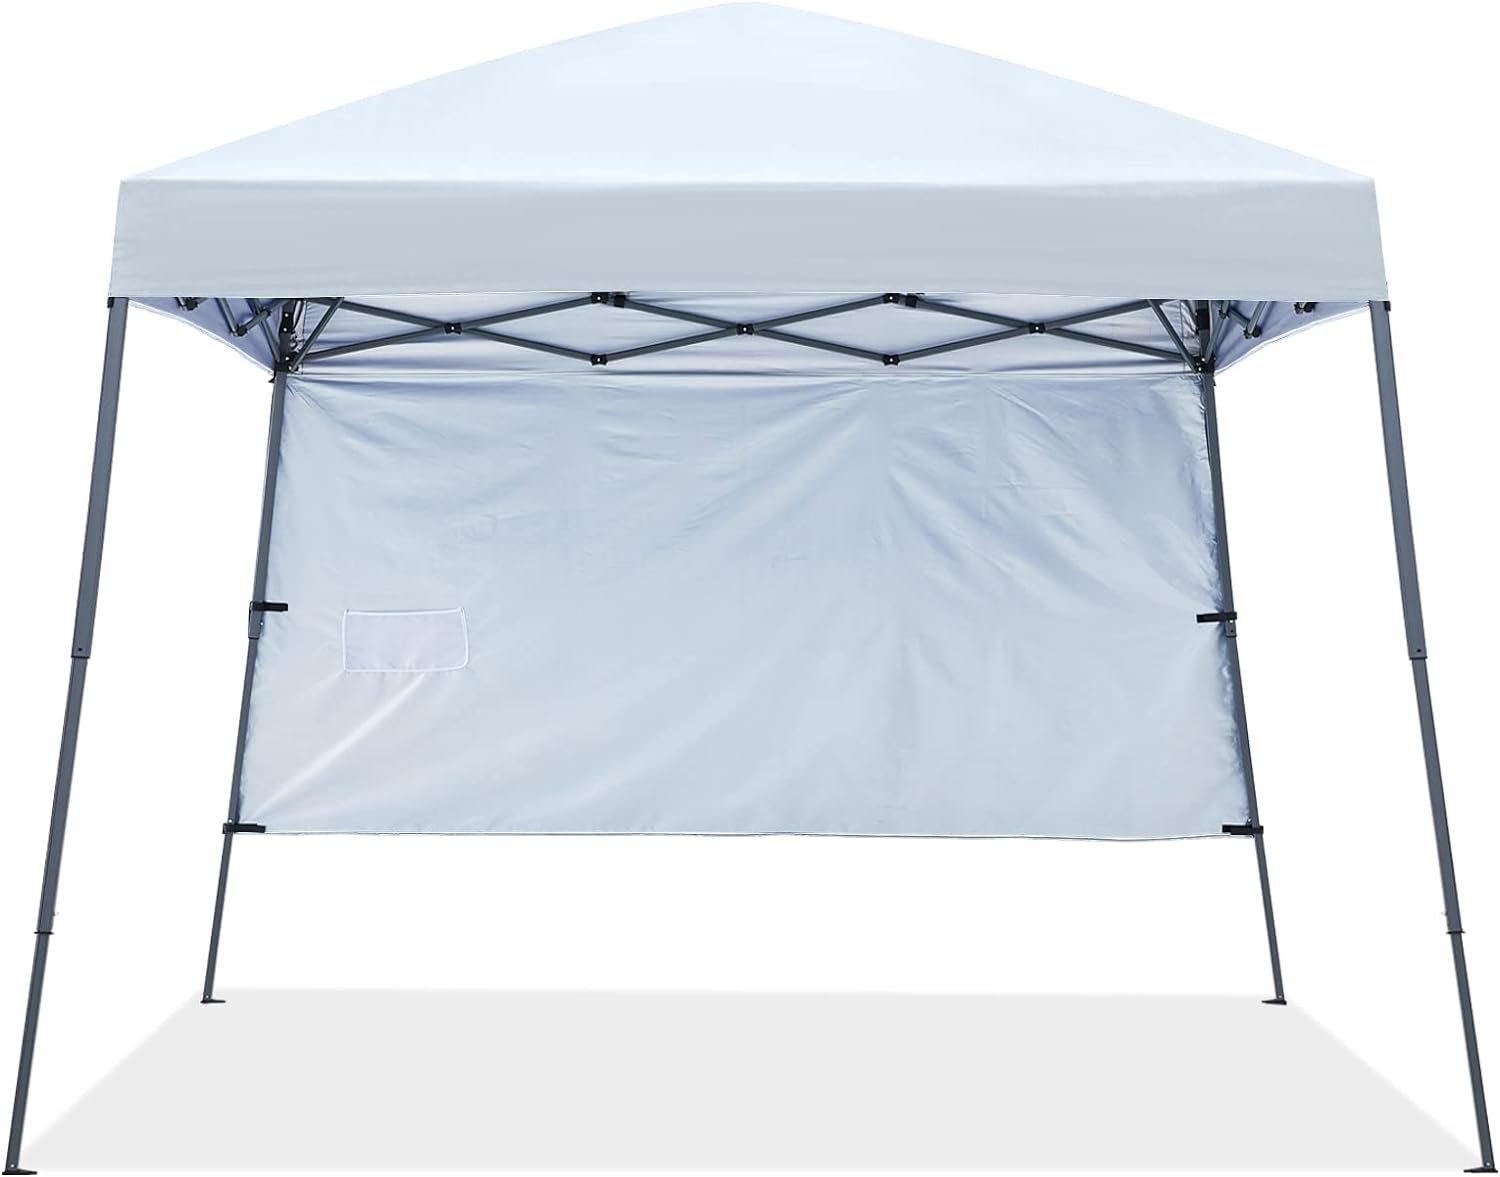 Outdoor Slant Beach Camping 10x10/8x8 Canopy Tent With 1 Sun Wall